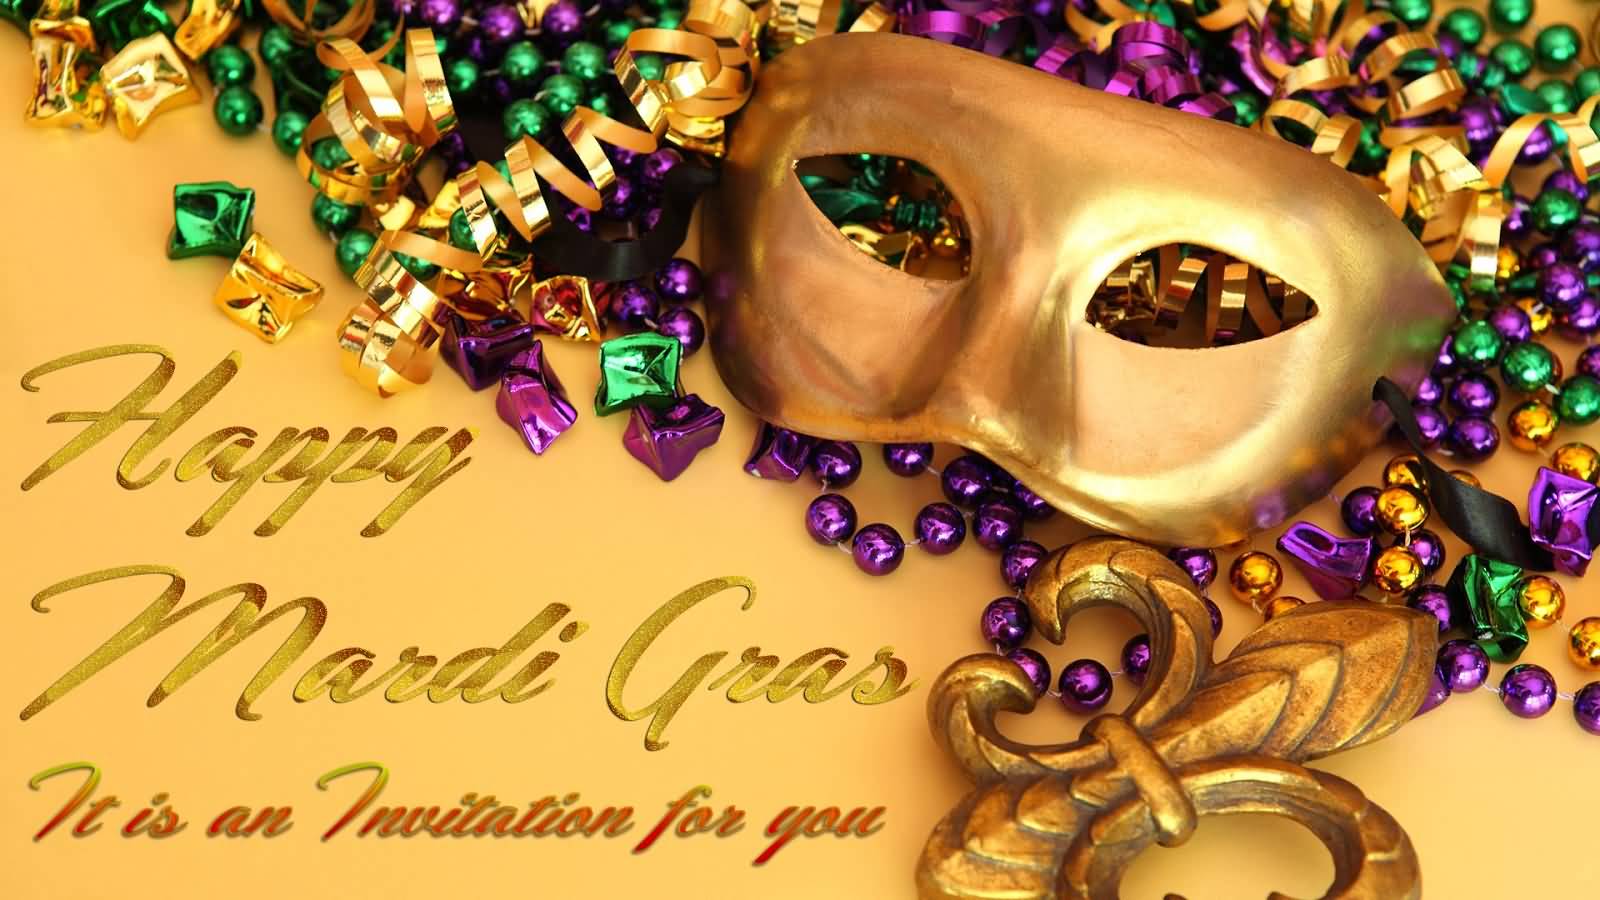 Happy Mardi Gras It Is An Invitation For You Mask